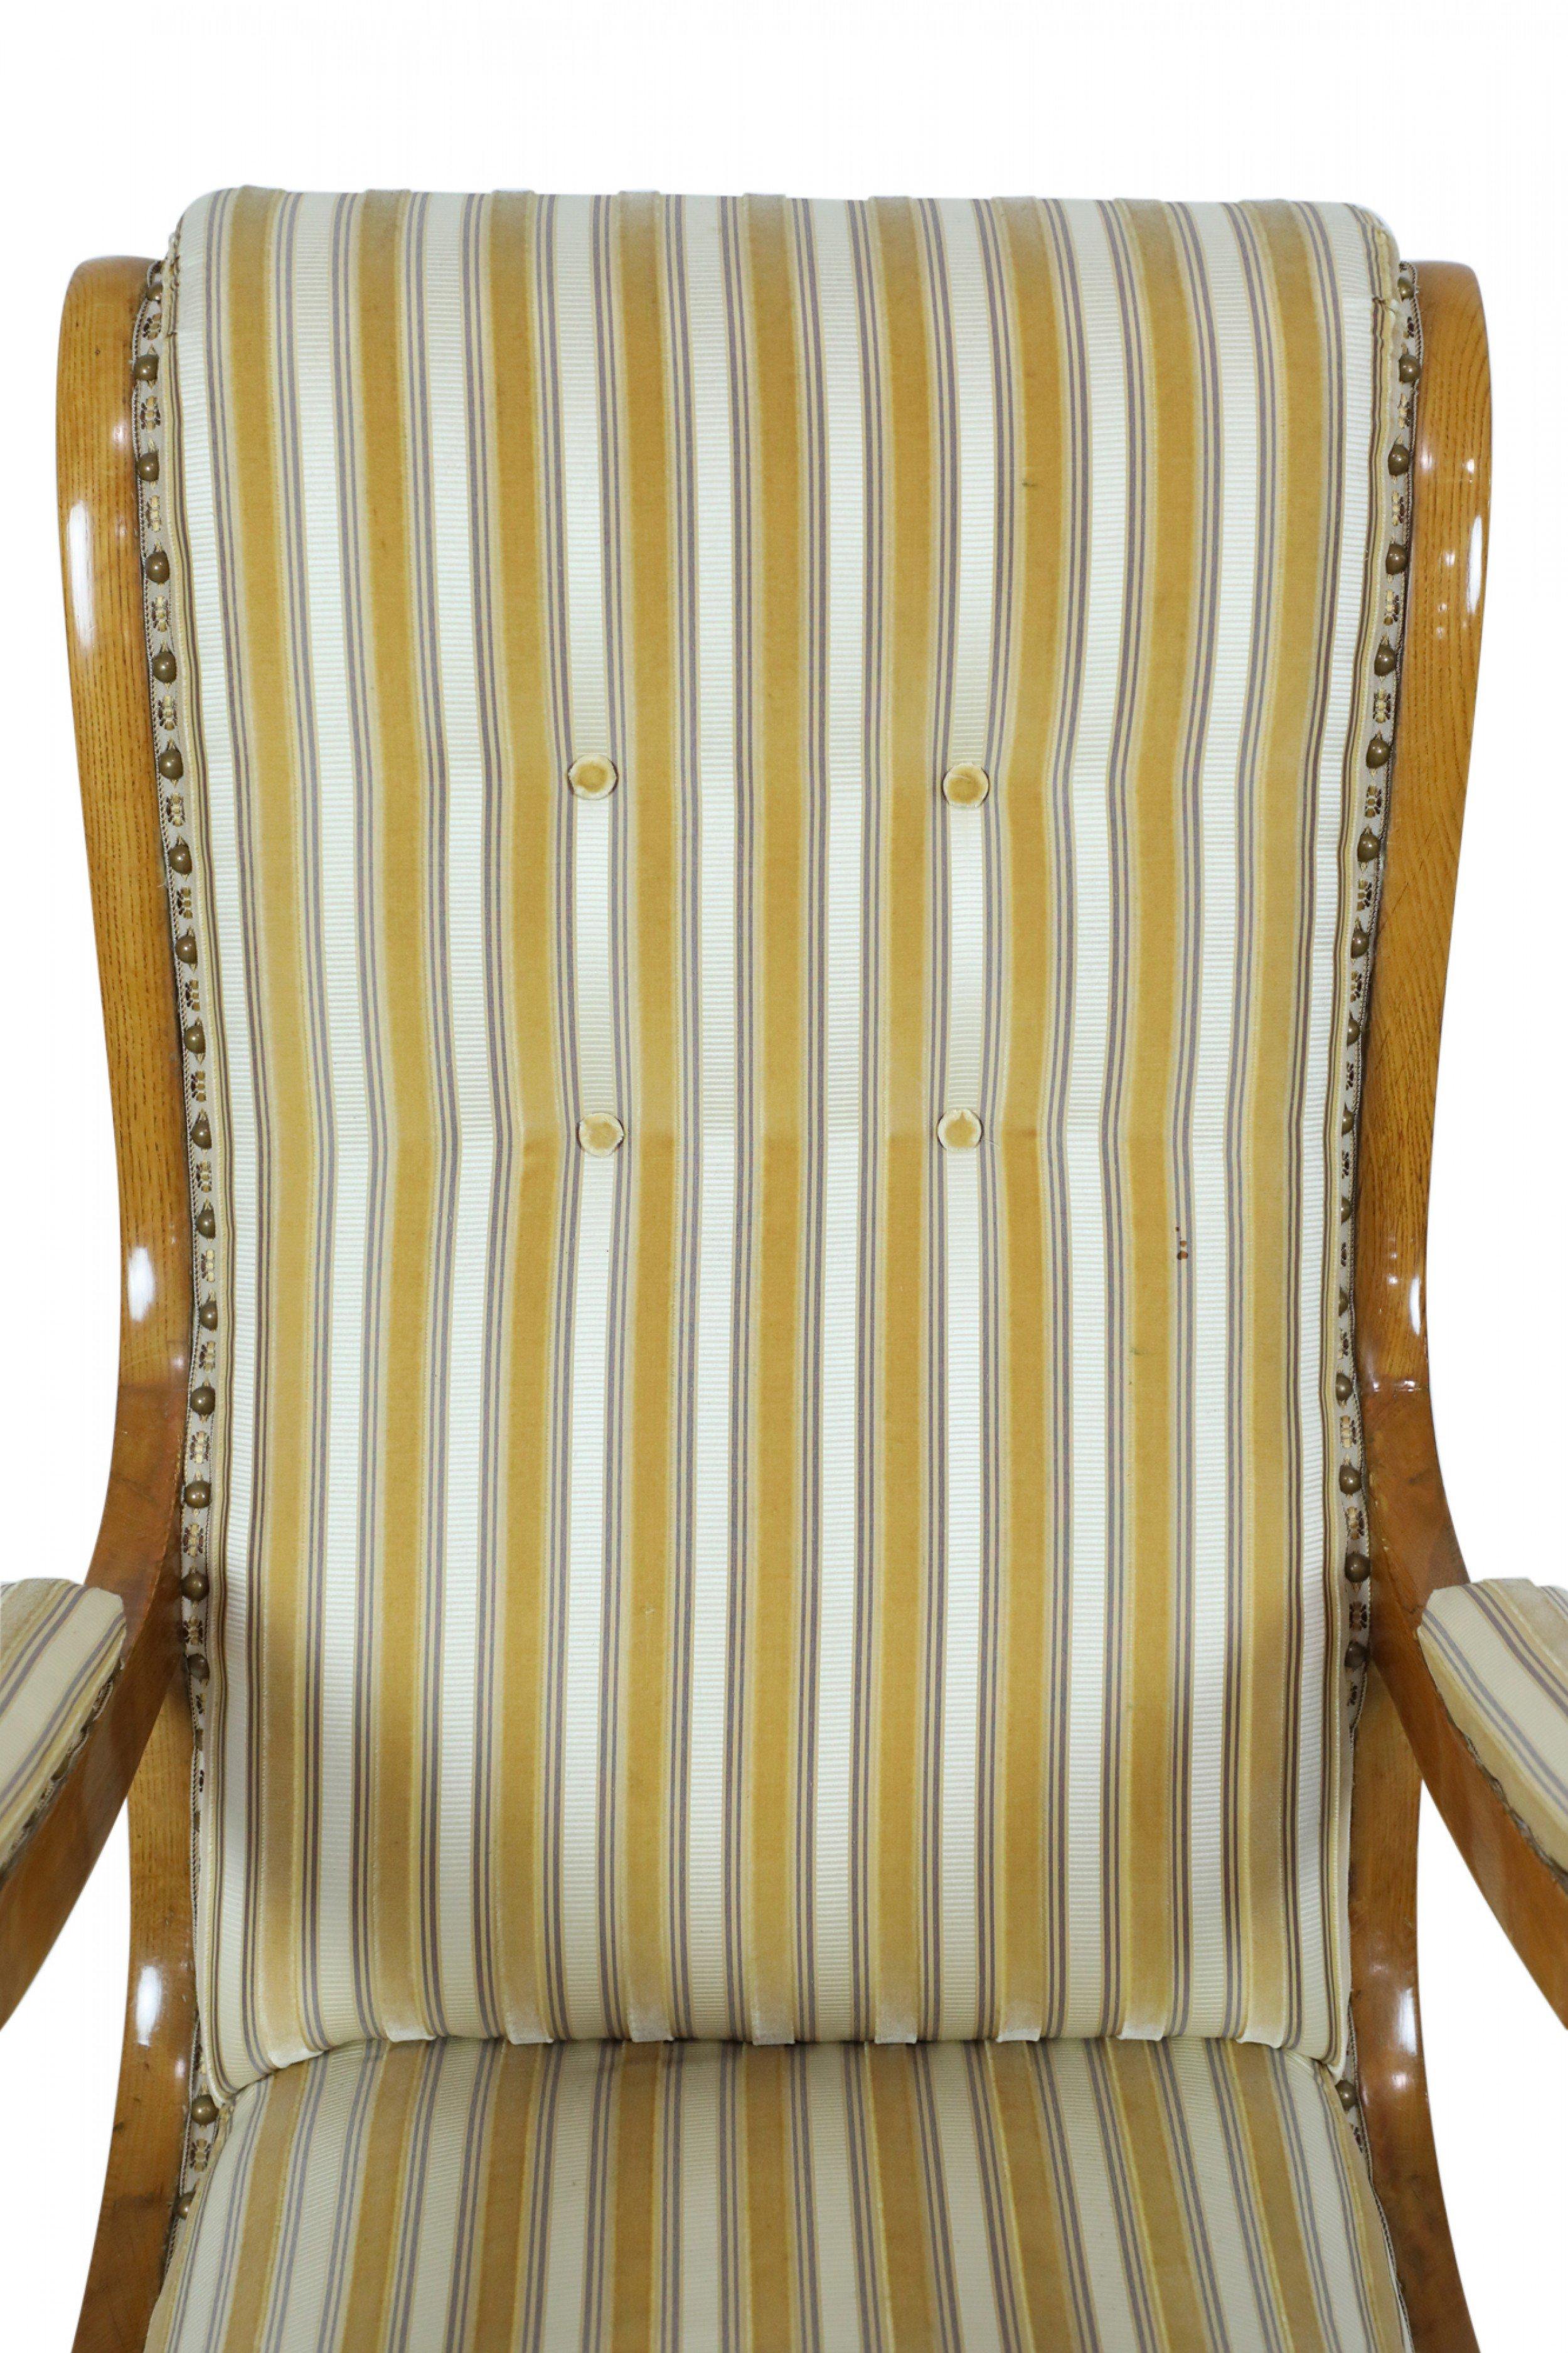 English Victorian Blond Wood Scroll Armchair with Striped Upholstery For Sale 10